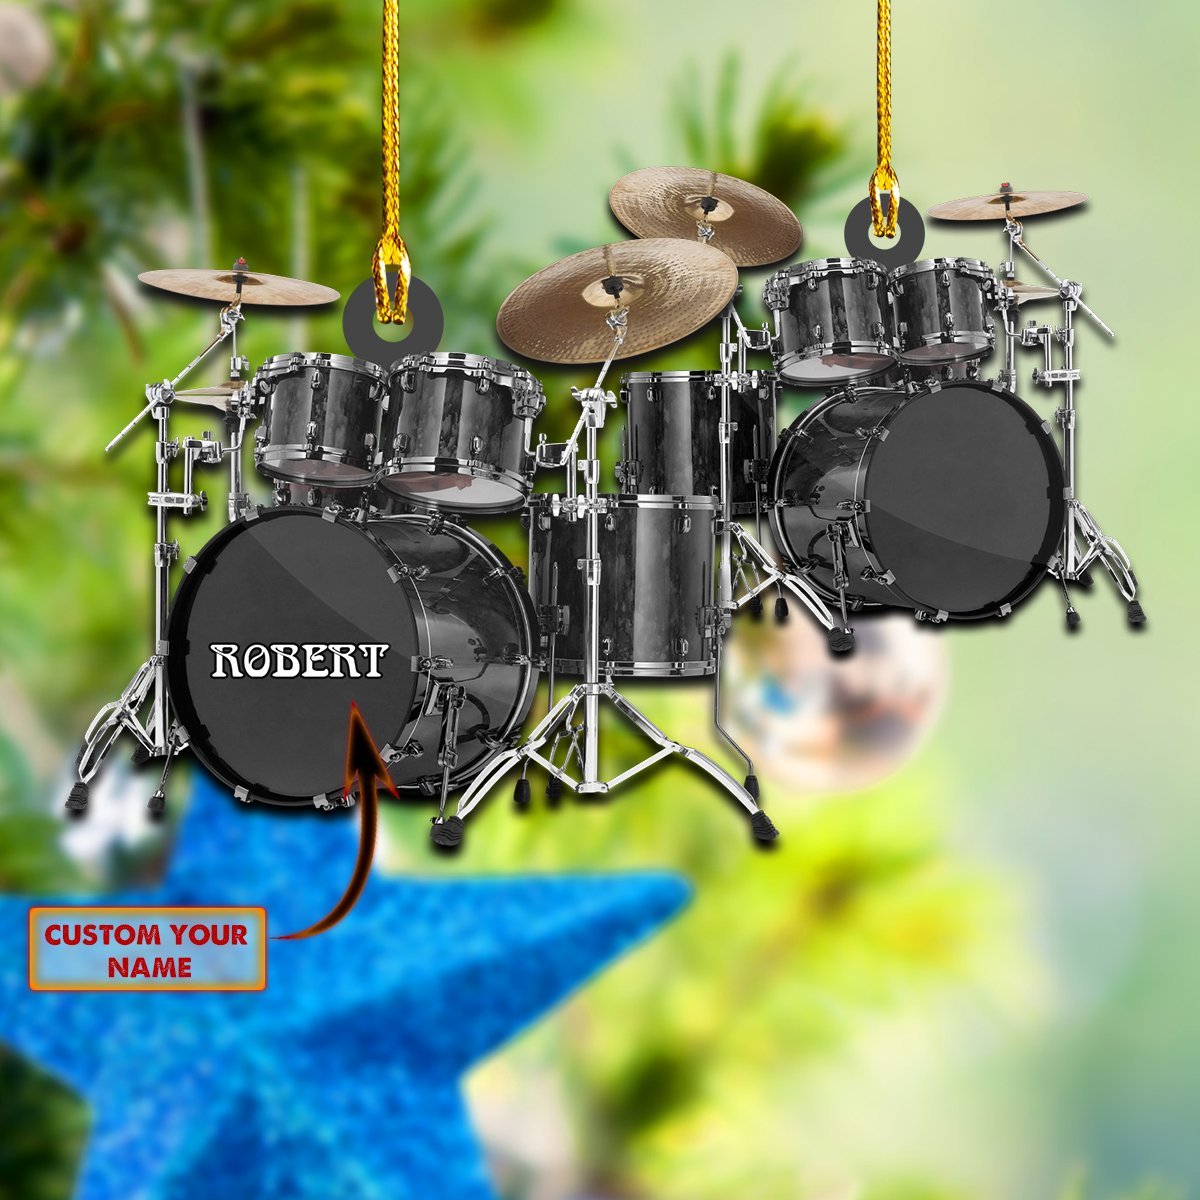 Drum Shaped Ornament/ Gift for Drummer/ Personalized Christmas Gift Drum Ornament